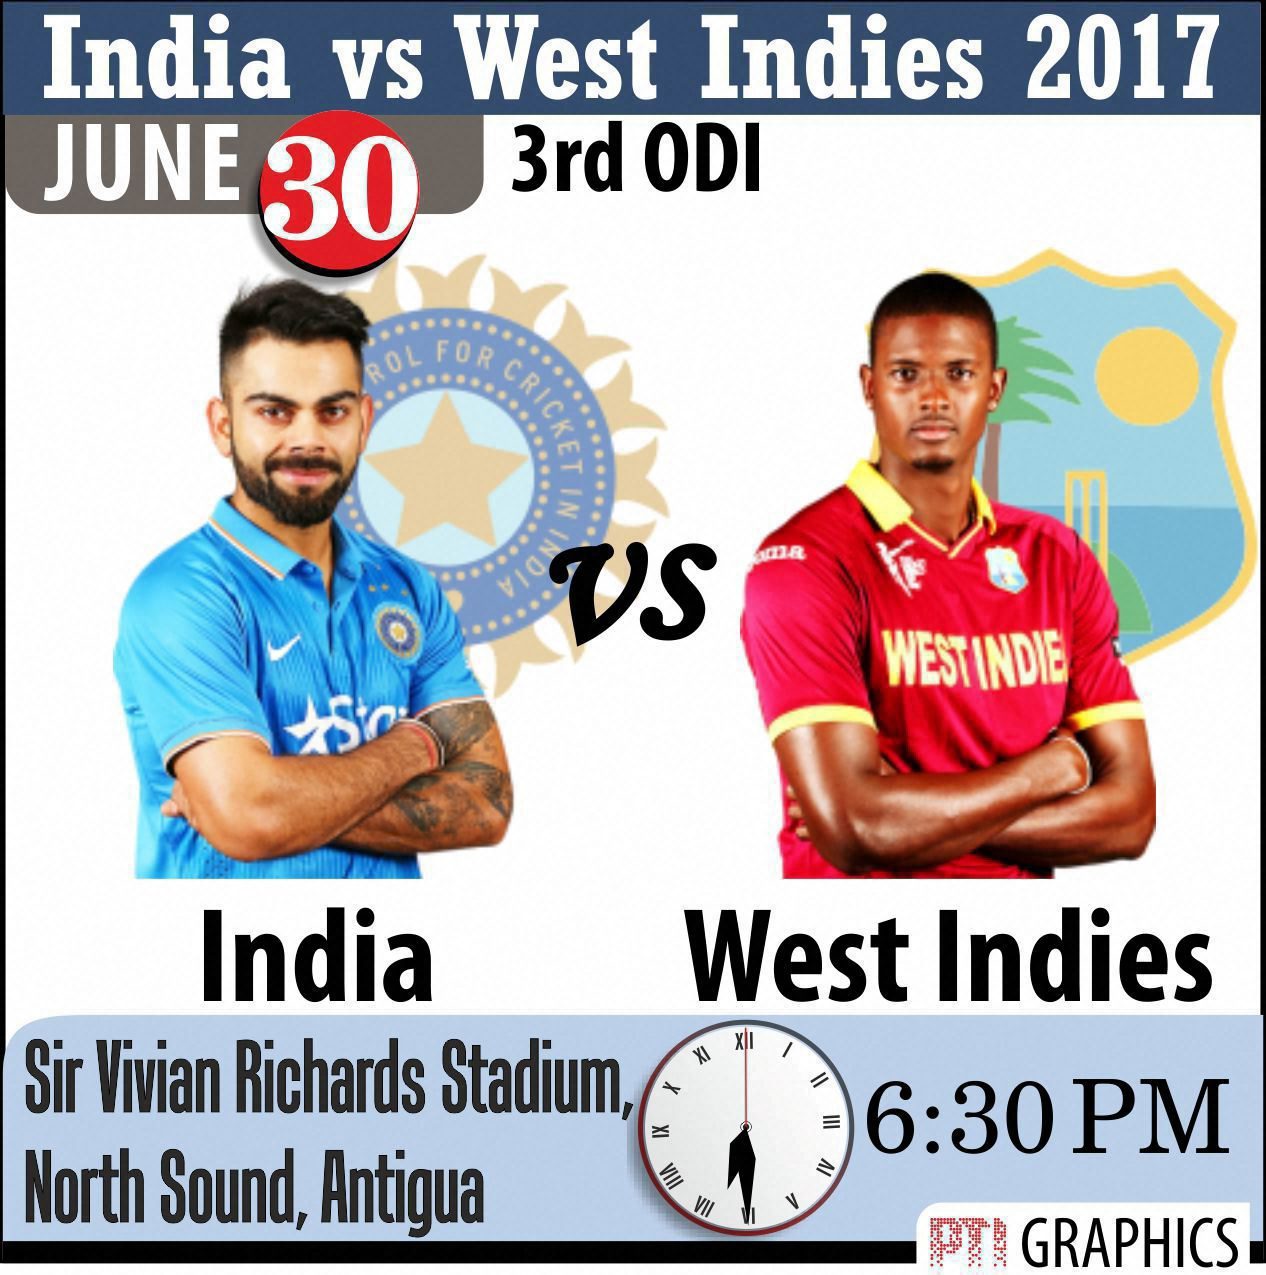 3rd ODI vs West Indies  The Shillong Times